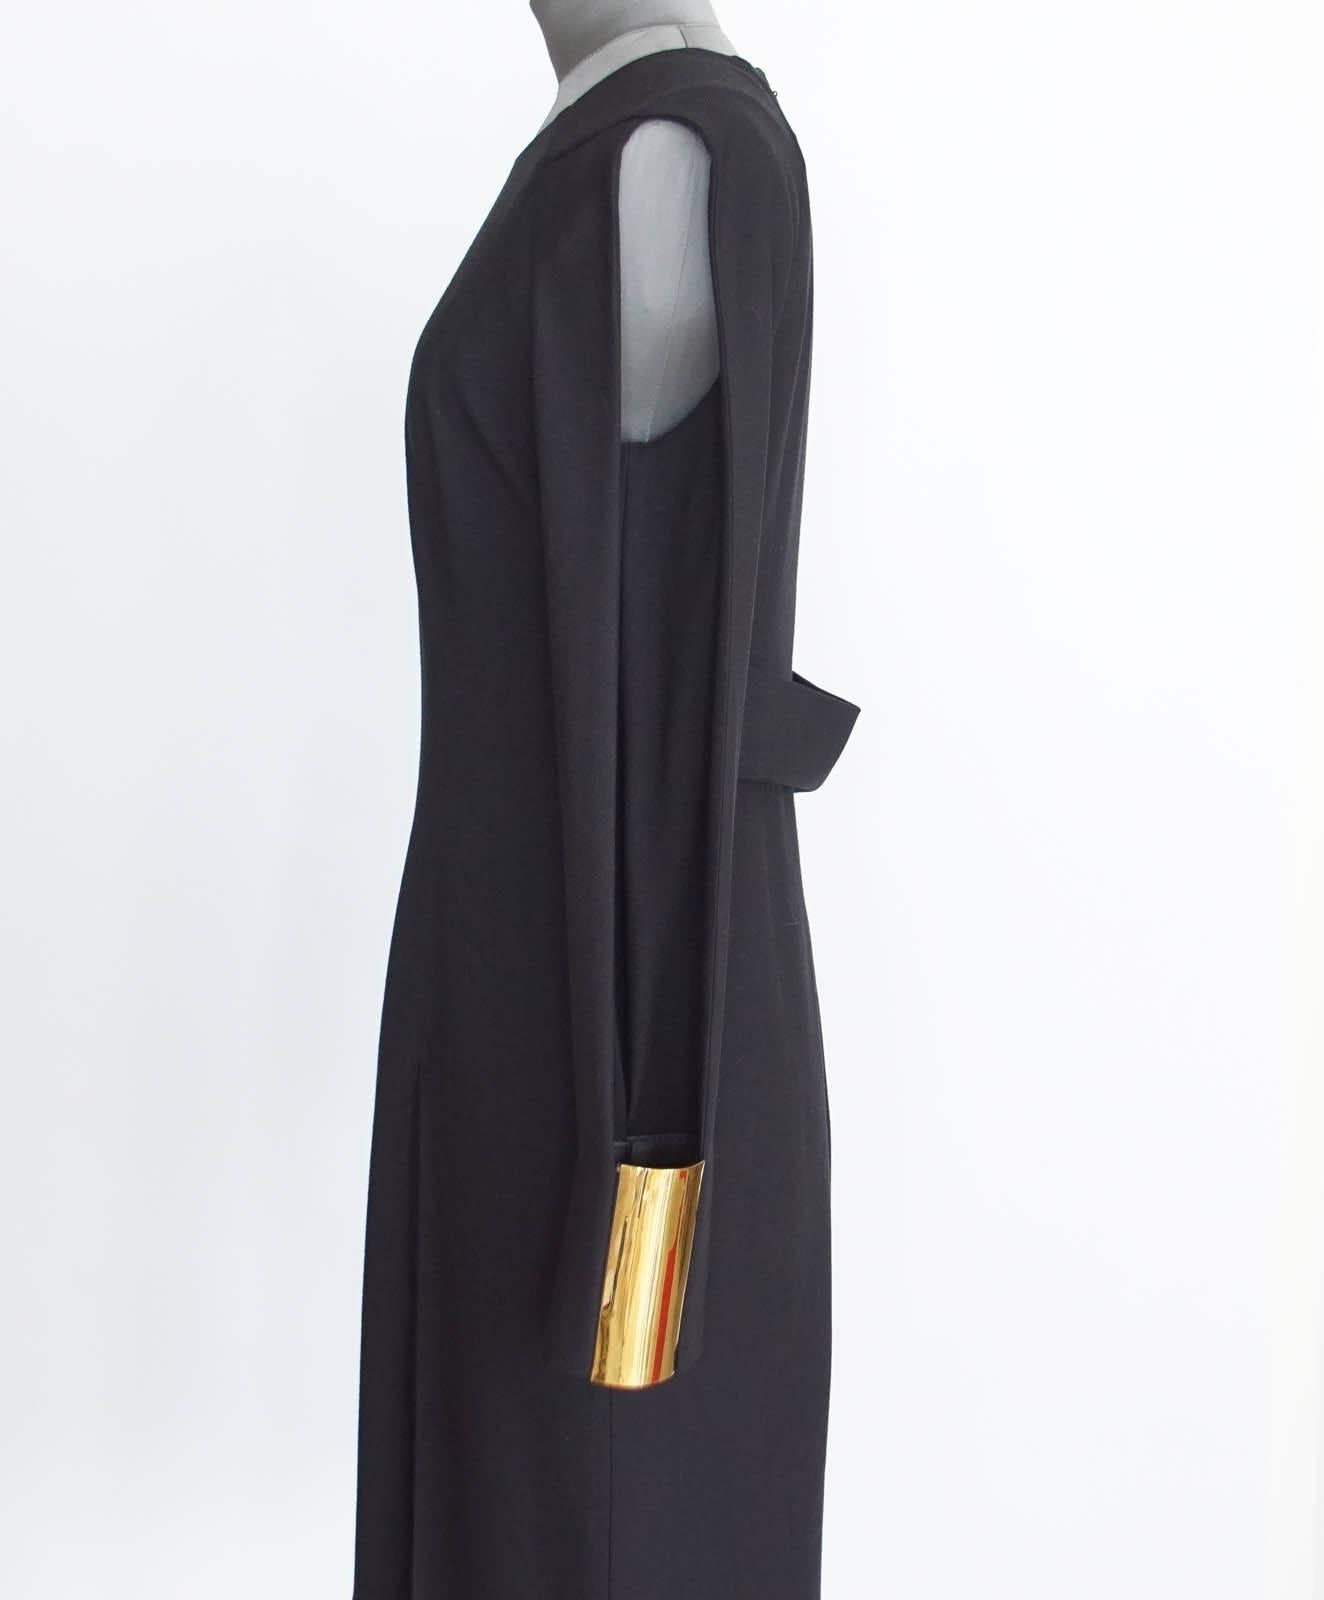 Striking Gucci long sleeve fitted black dress with a high round neck.
Sleeves are cut open from the shoulder to the wrist on the outside with a 4.5